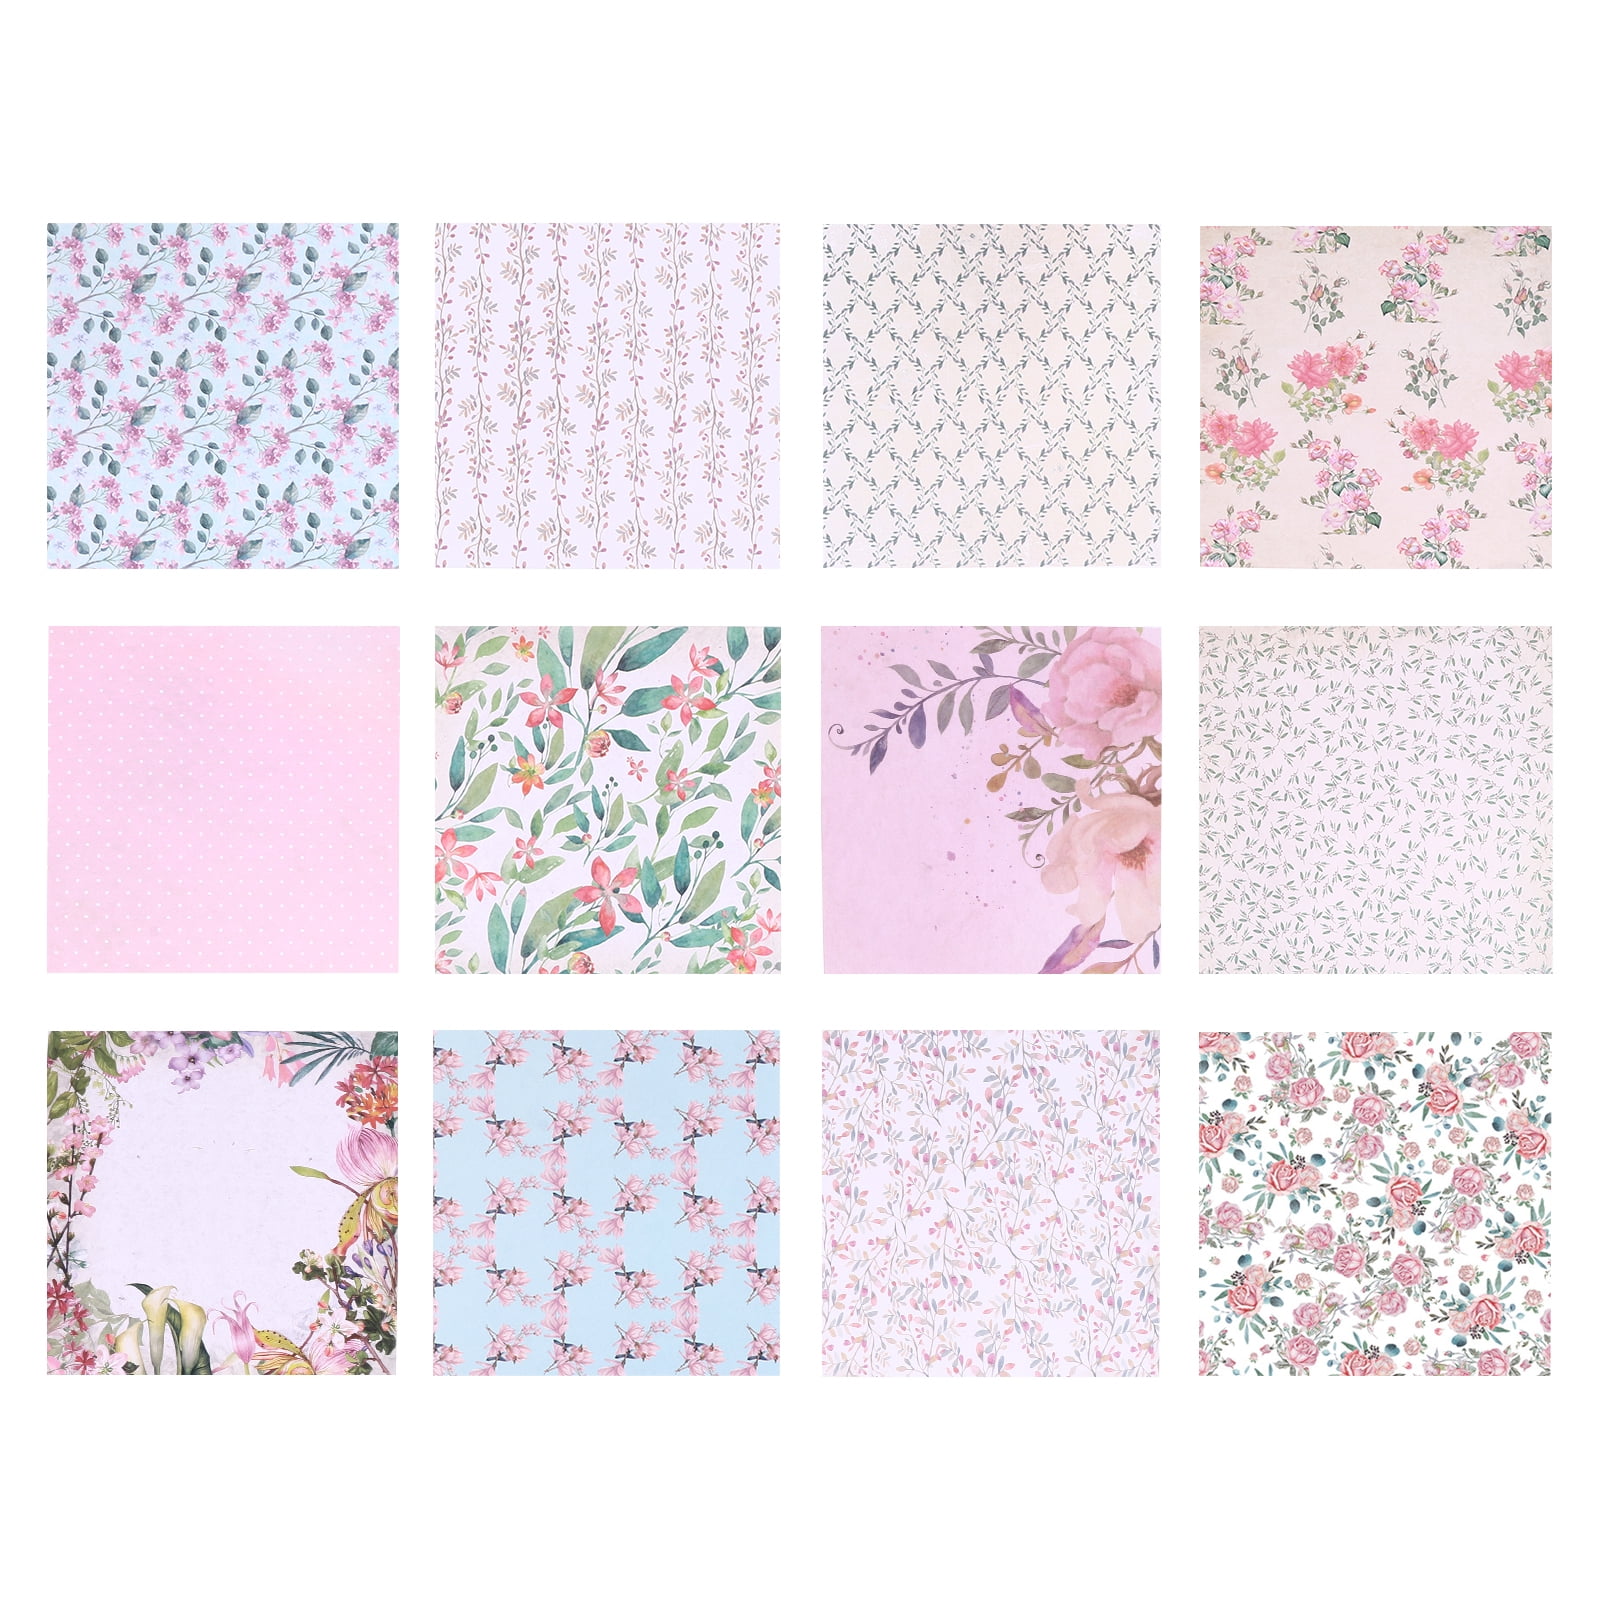 12 Sheets 6X6 Pink Flower Themed Scrapbook Paper, Floral Patterned DIY  Background Paper Vision Board Supplies For Scrapbooking